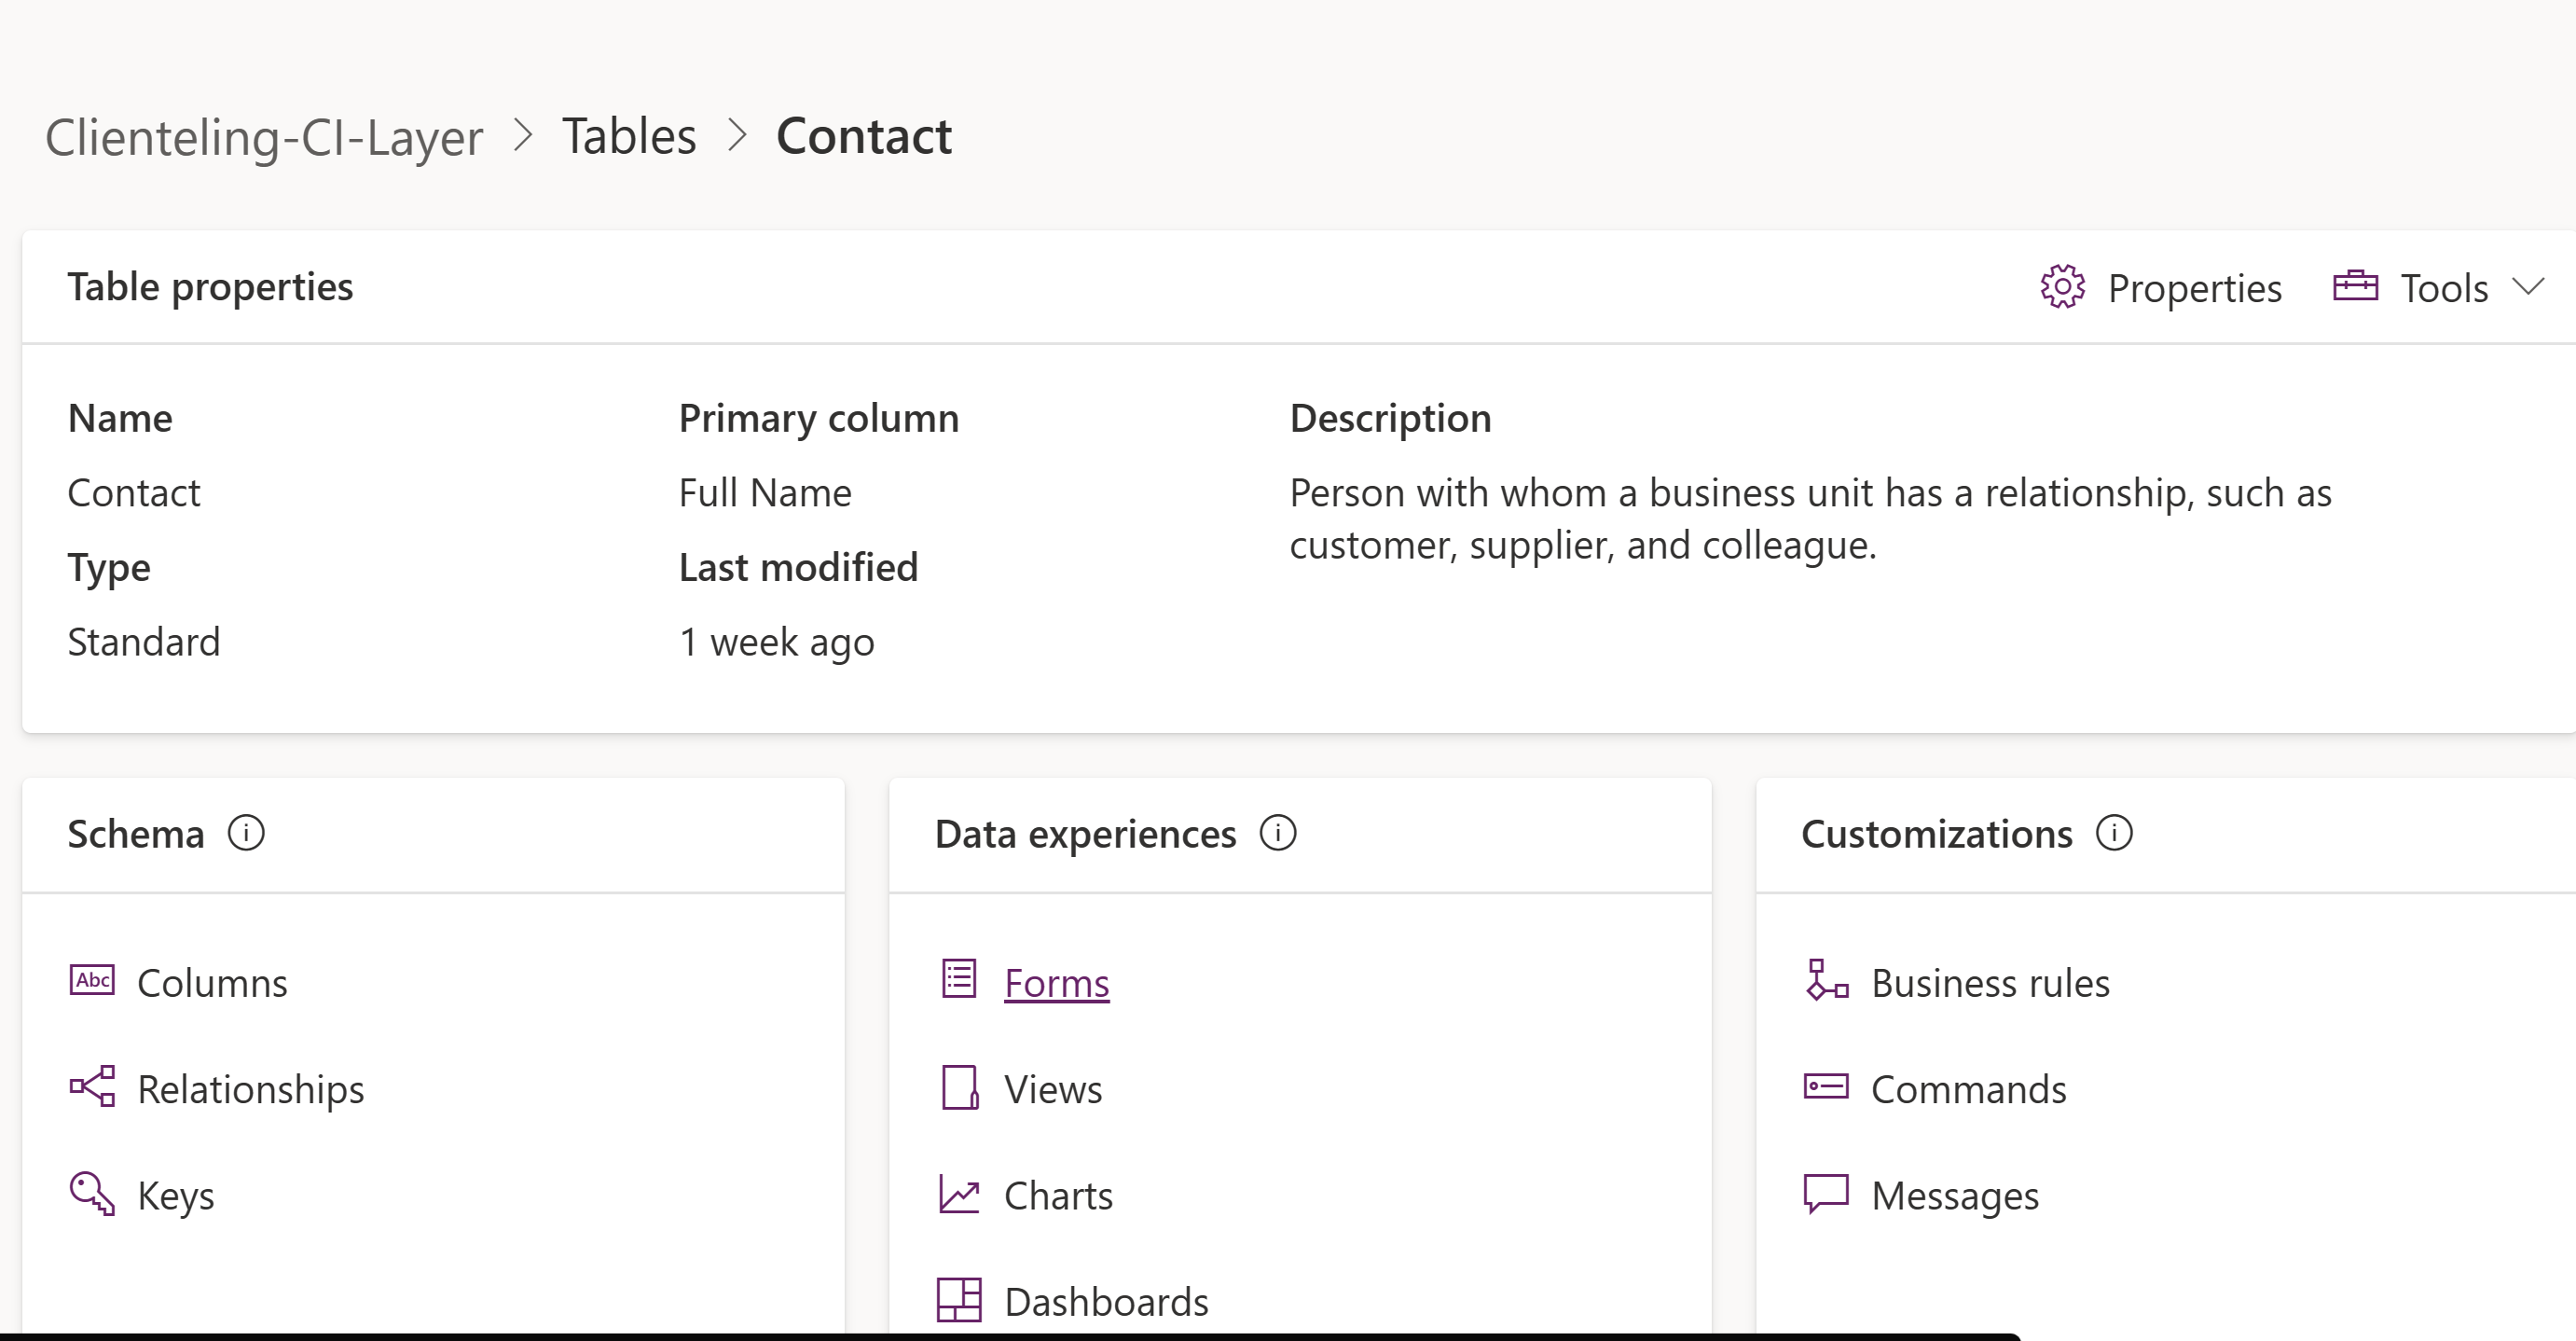 The image shows how to add contact forms to the solution.